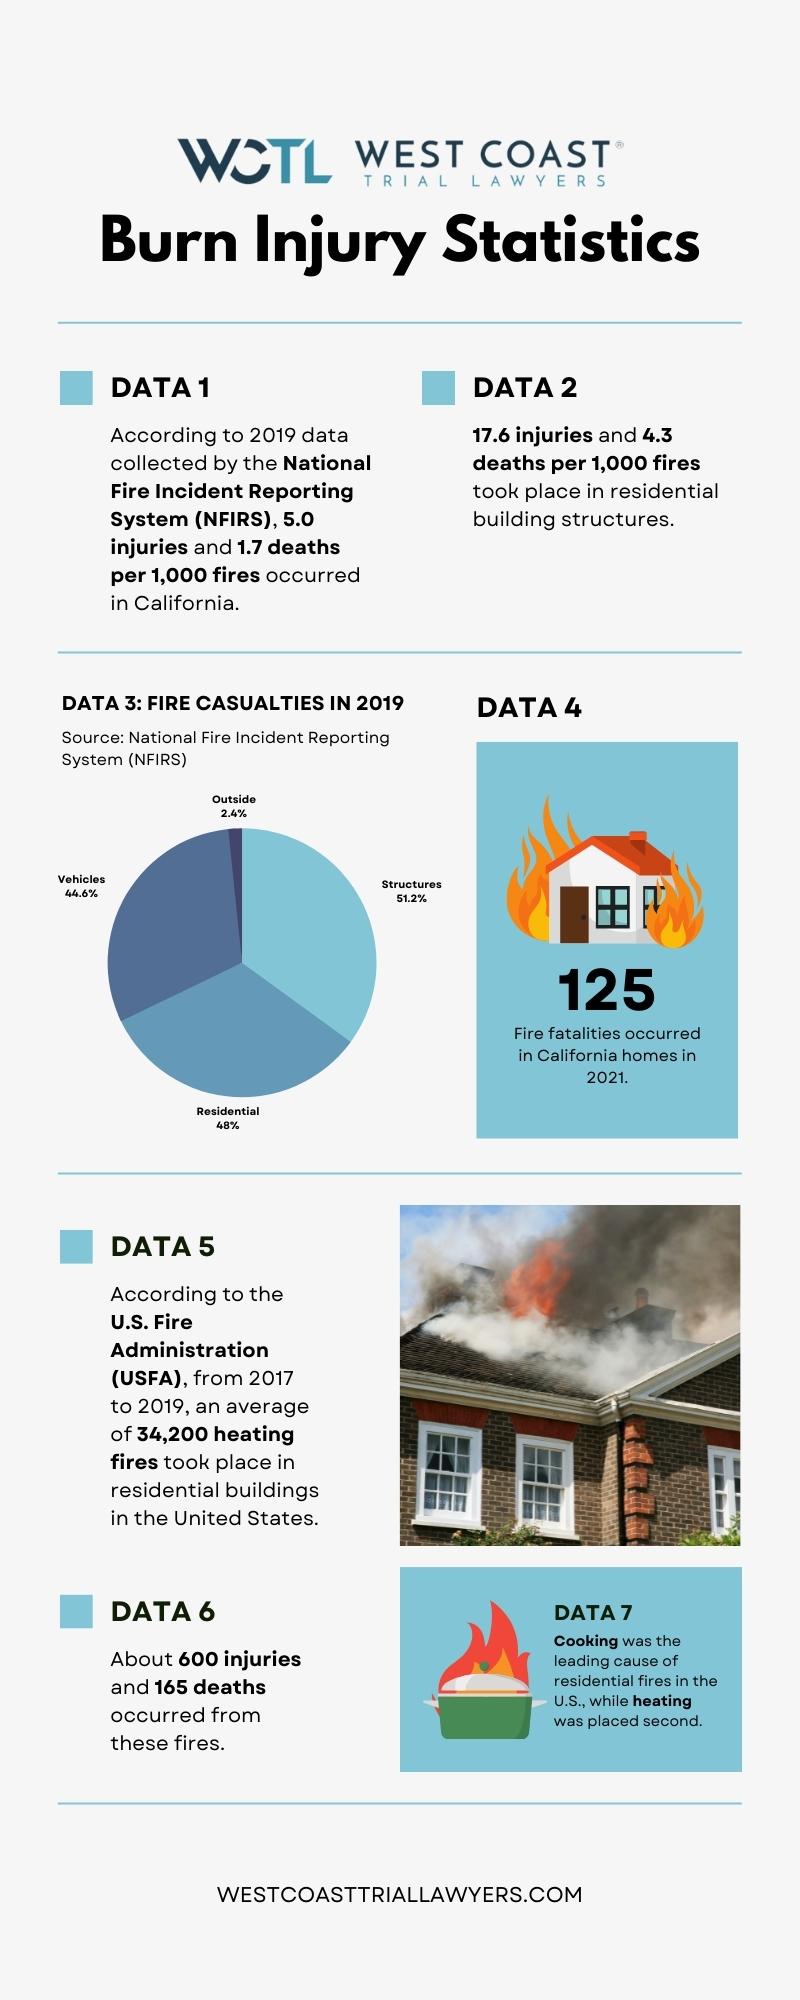 An infographic on burn injury statistics from the burn injury lawyers at West Coast Trial Lawyers.